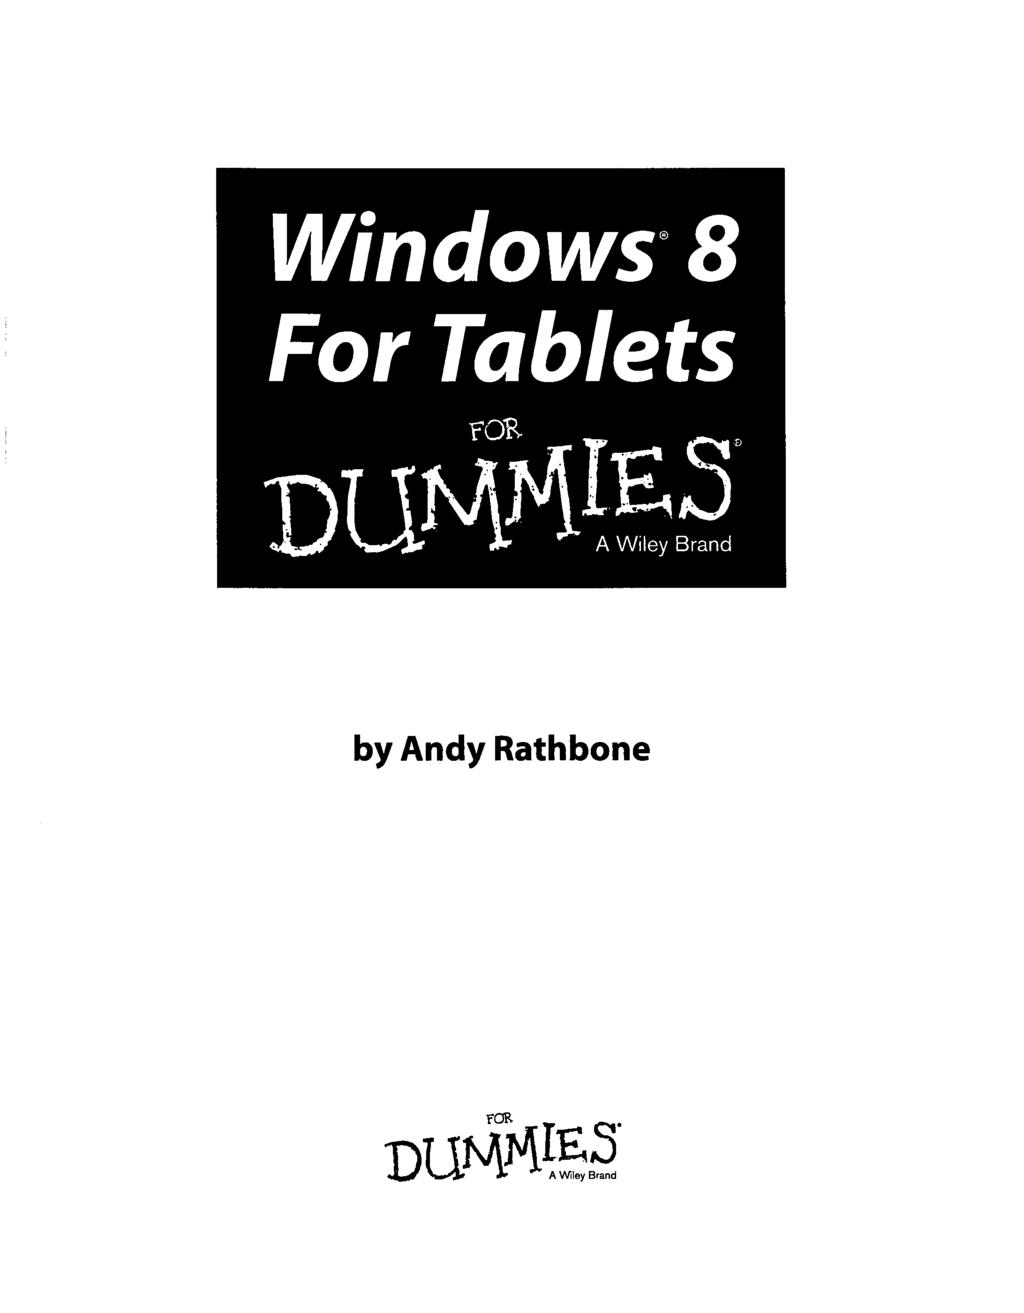 Windows 8 For Tablets